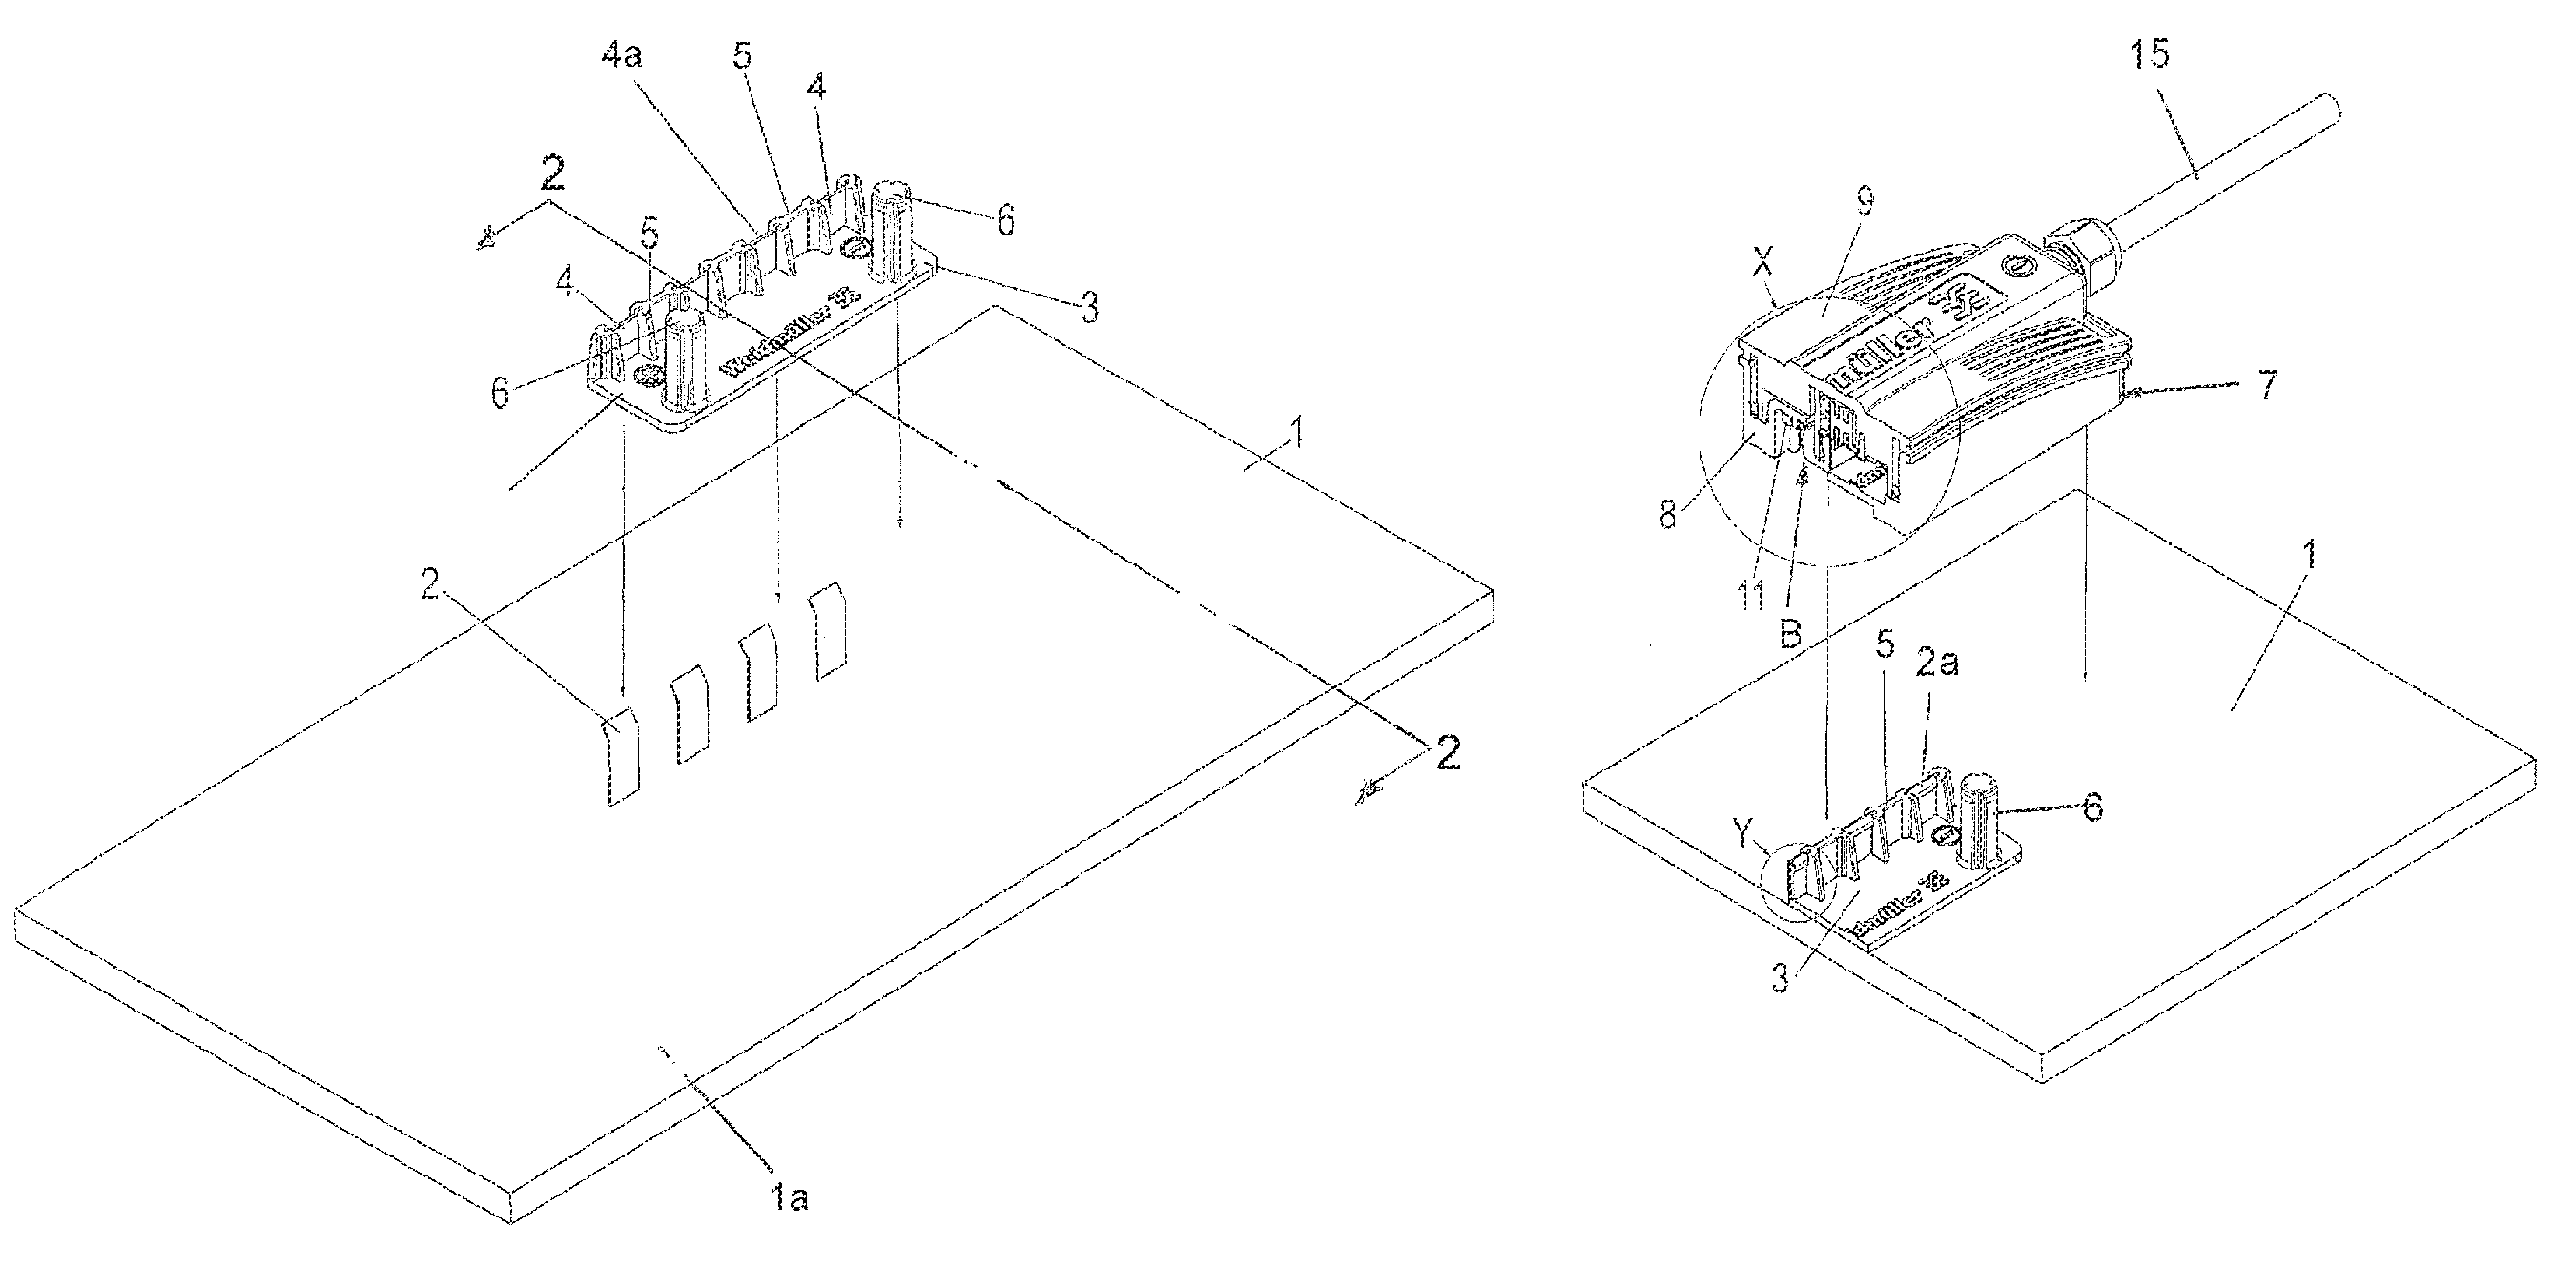 Connector for connecting conductors of a cable to flat conductors of a photovoltaic cell